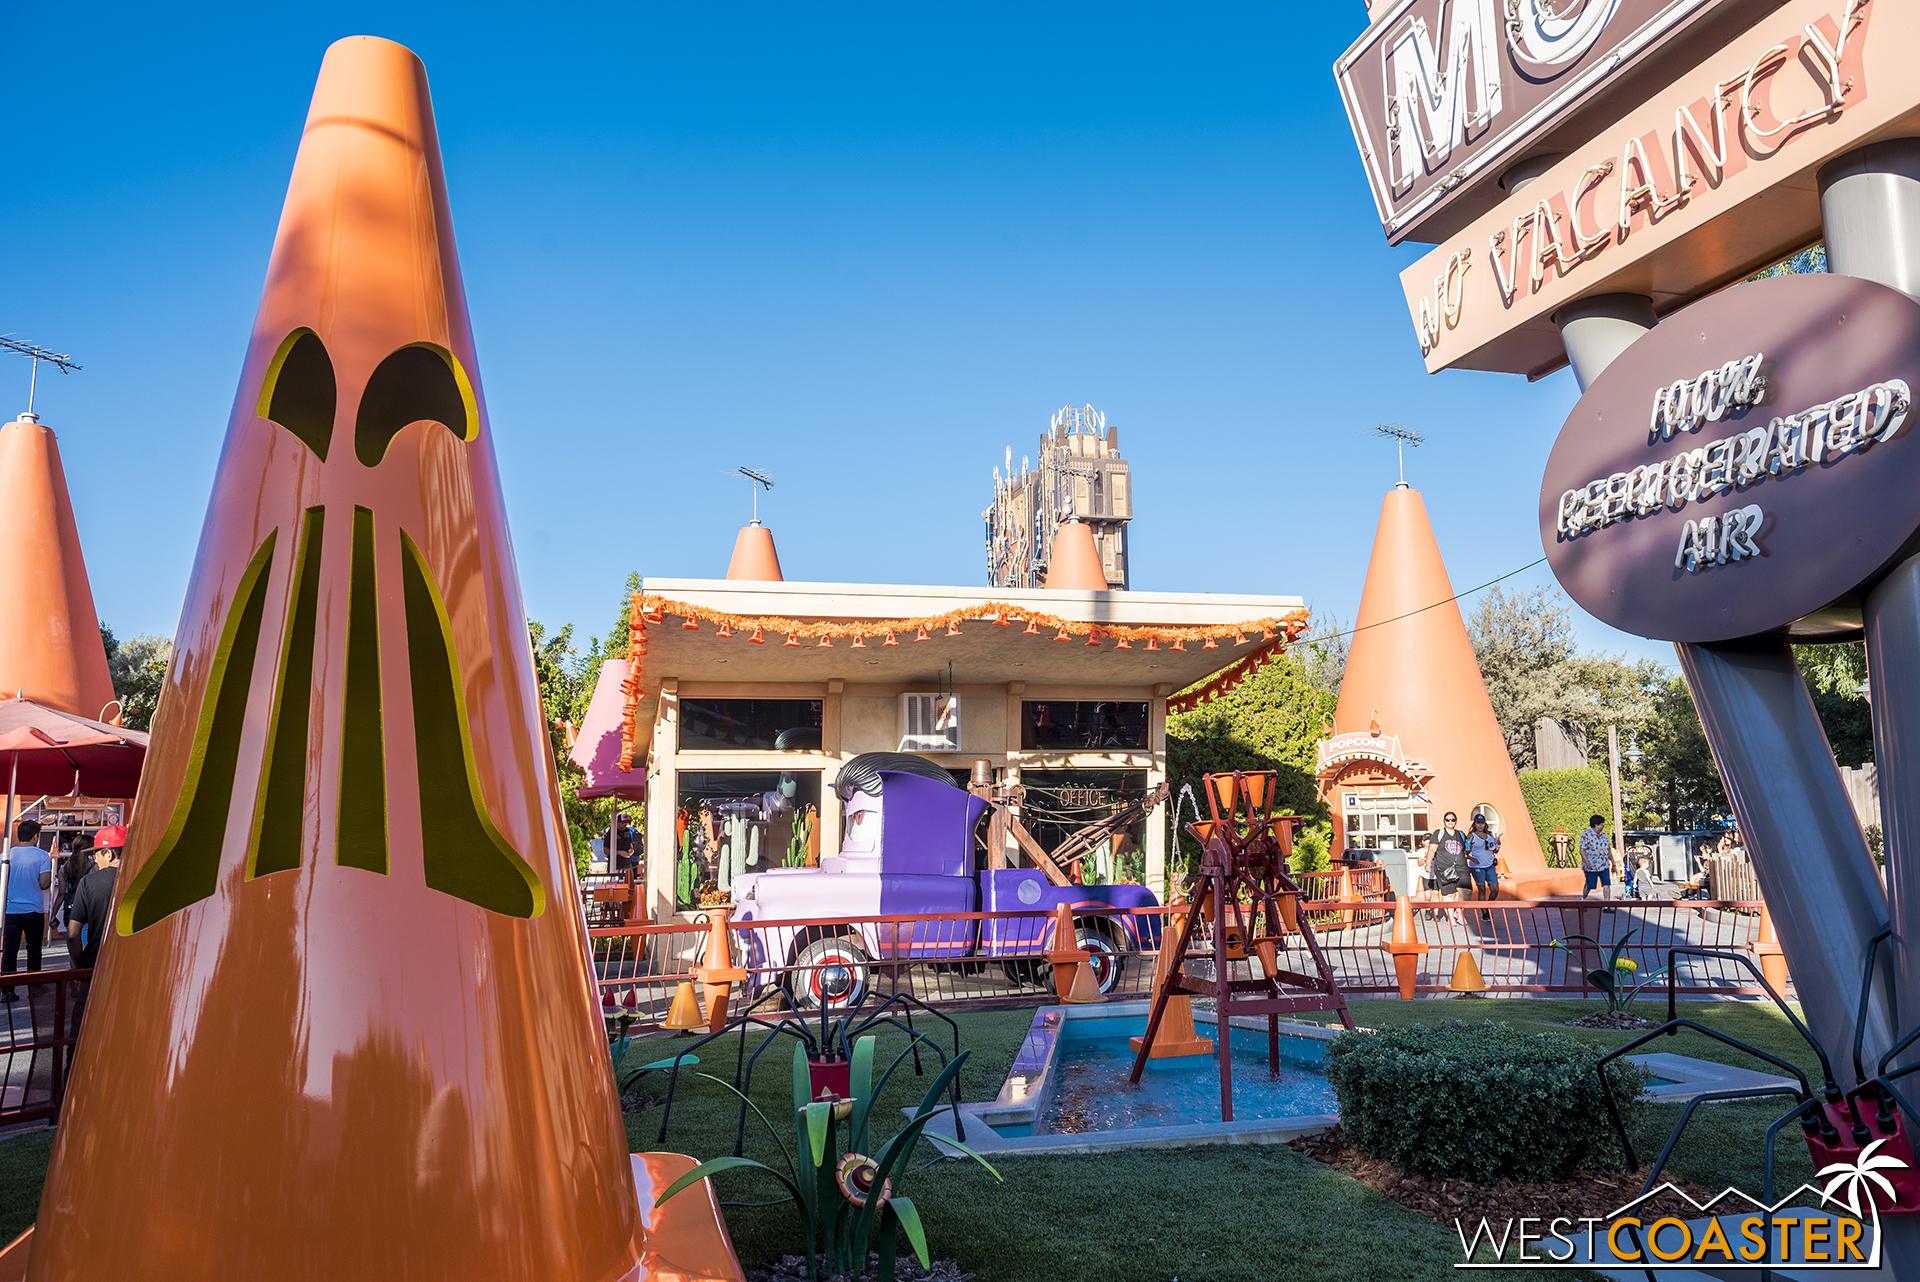  The Cozy Cone has gotten ghostly. 